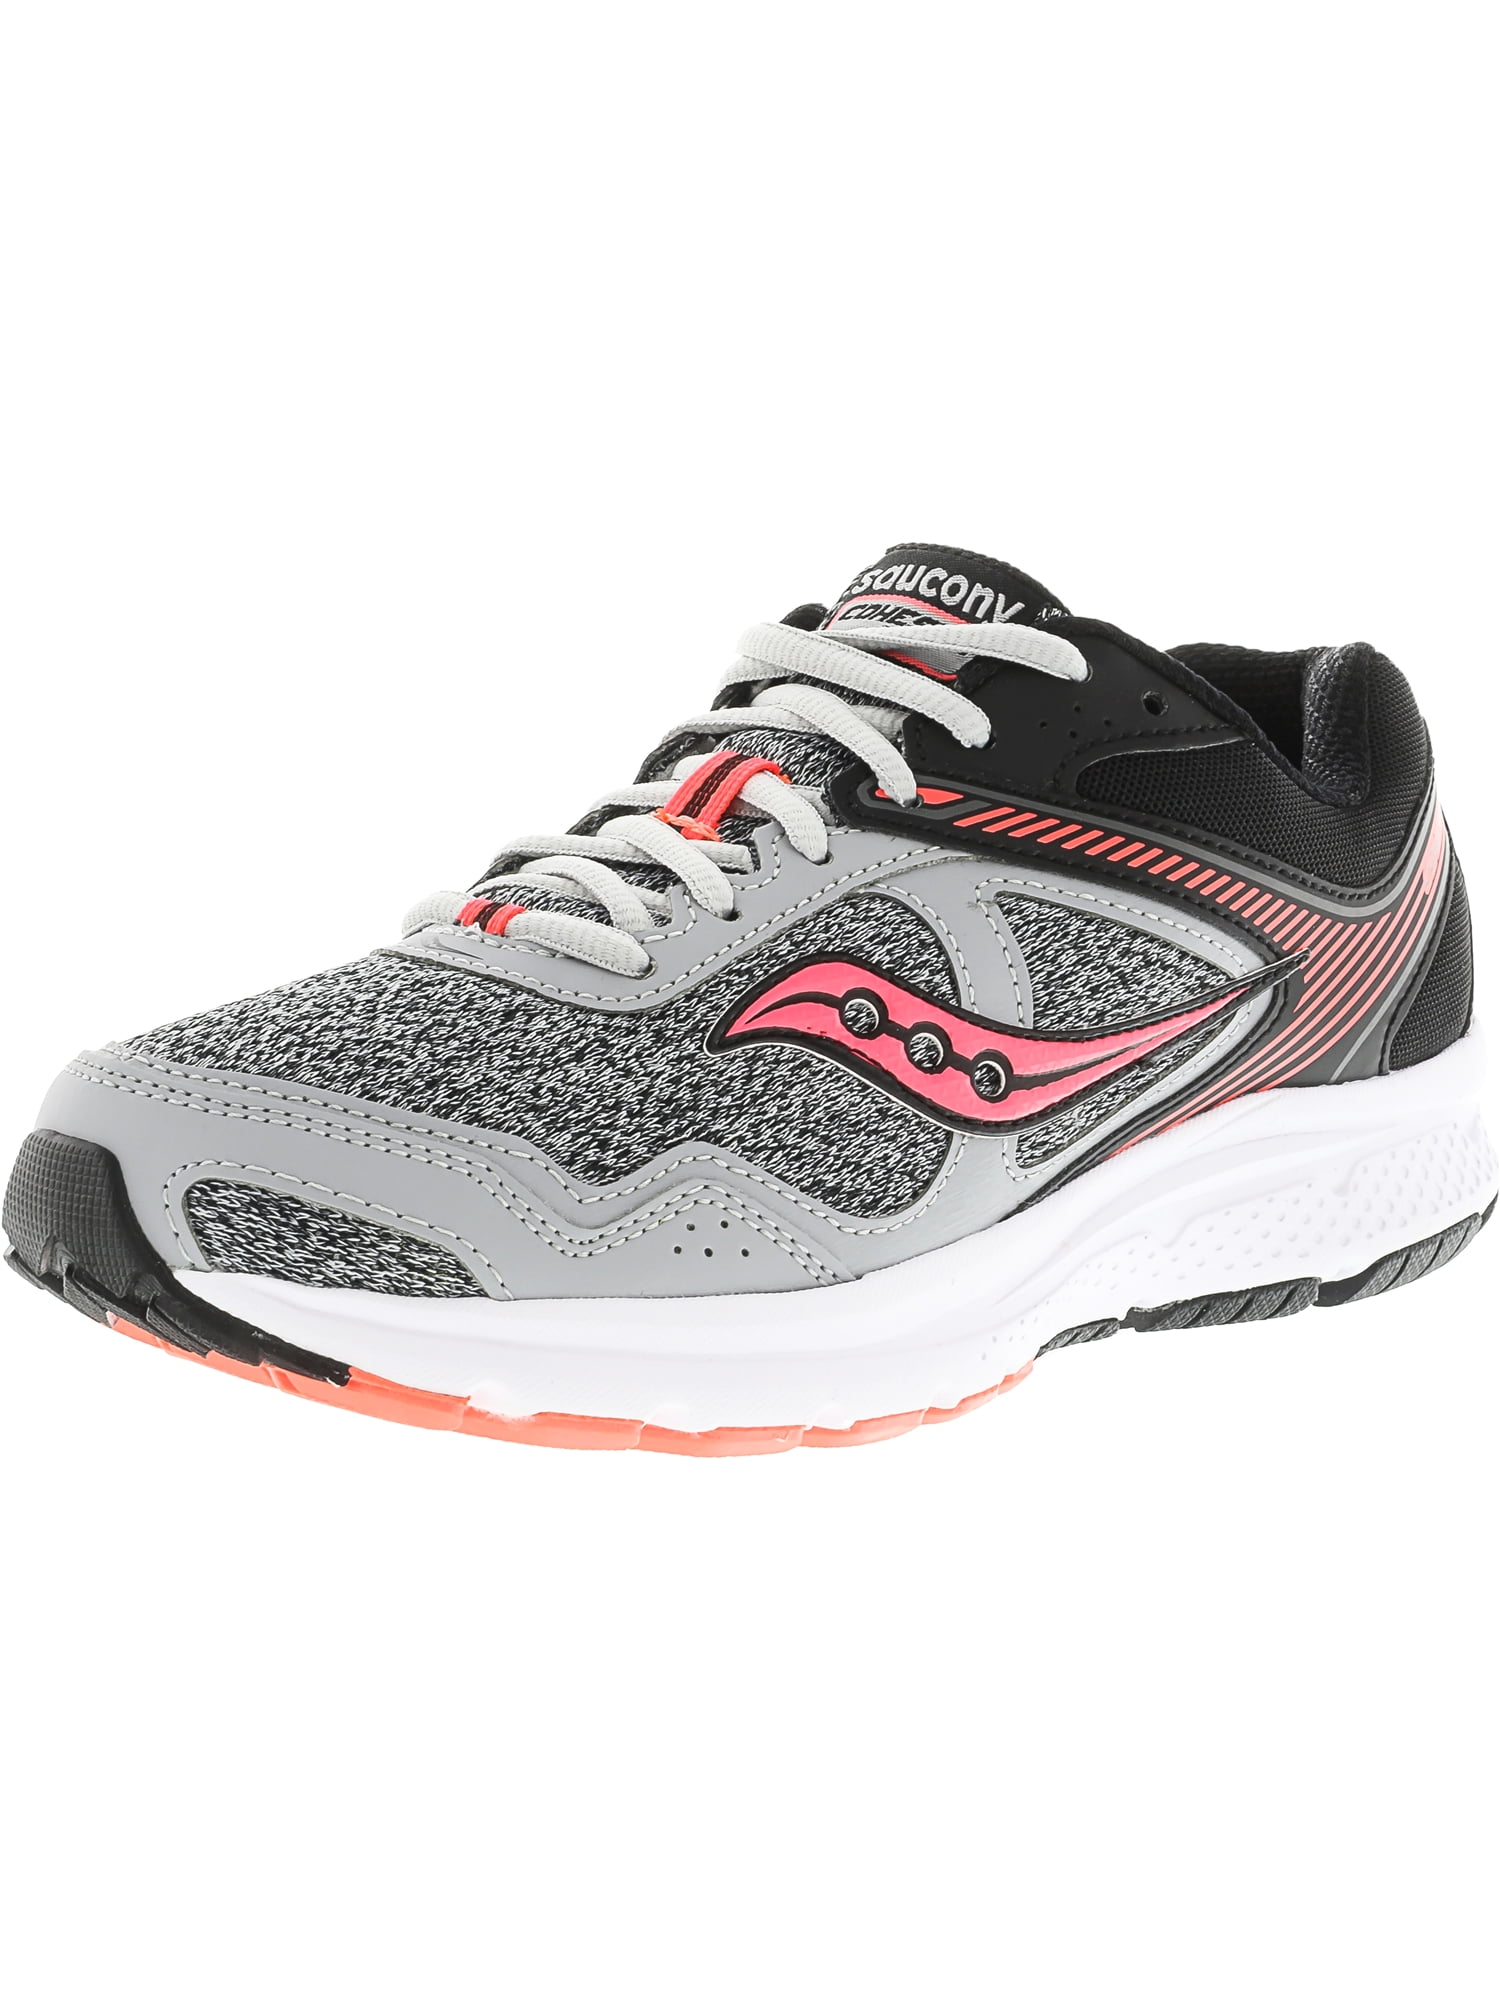 Saucony Women's Grid Cohesion 10 Grey / Black Coral Ankle-High Running ...